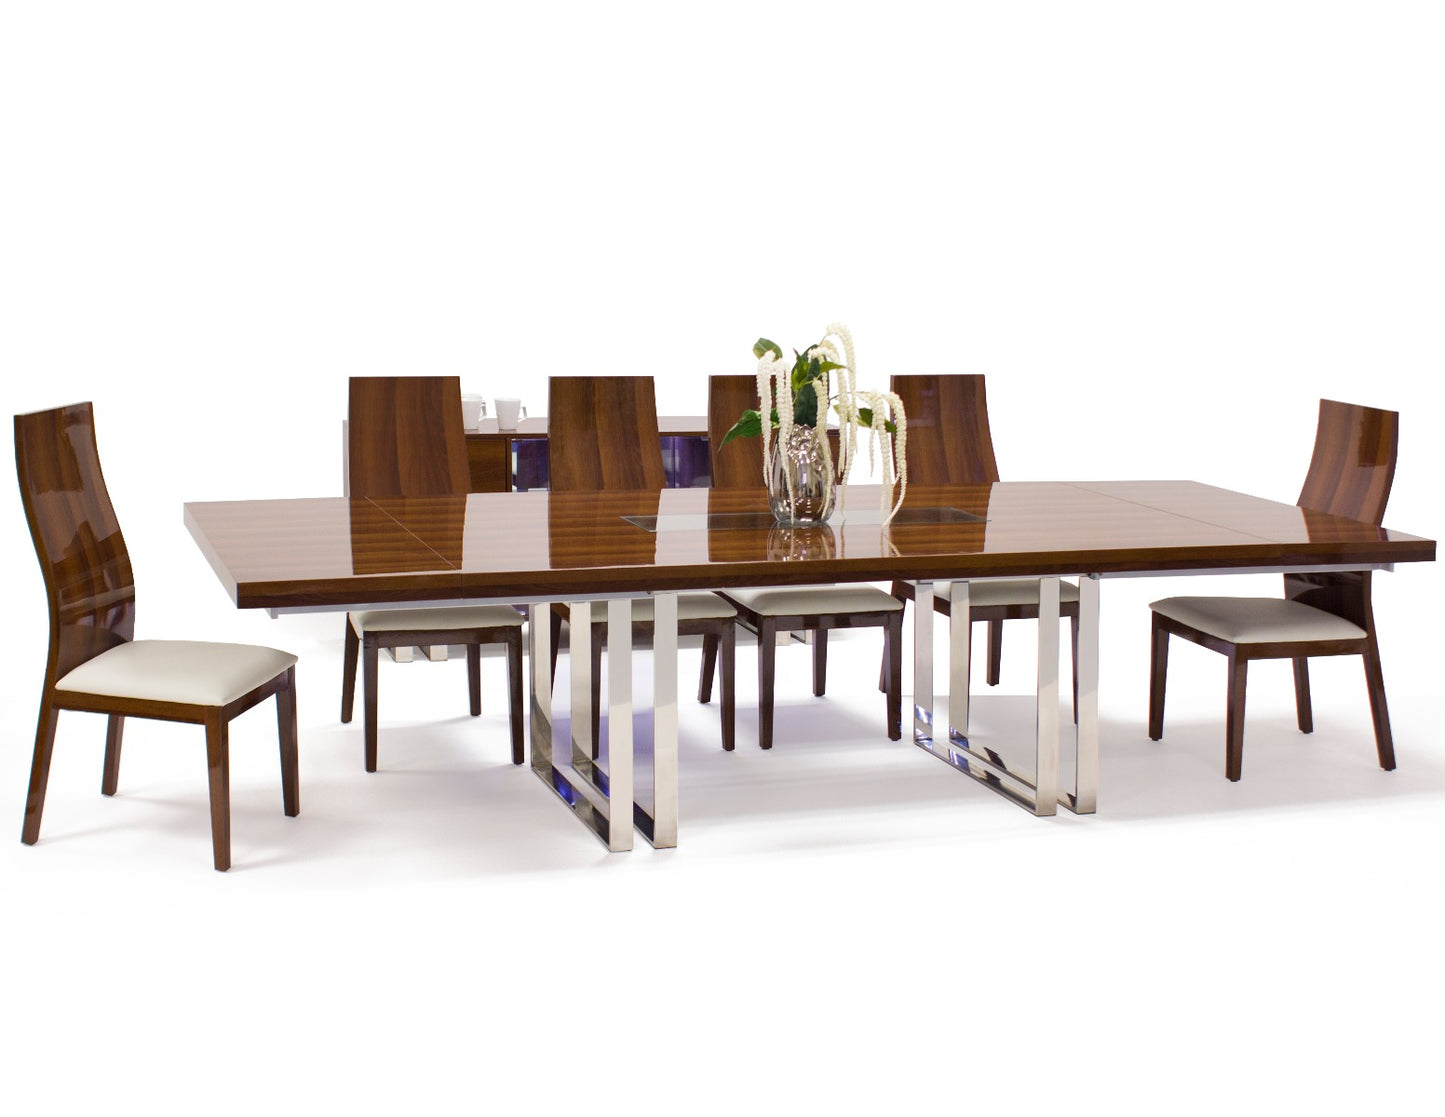 Galway Dining Collection - Walnut Lacquer - 2 Extensions